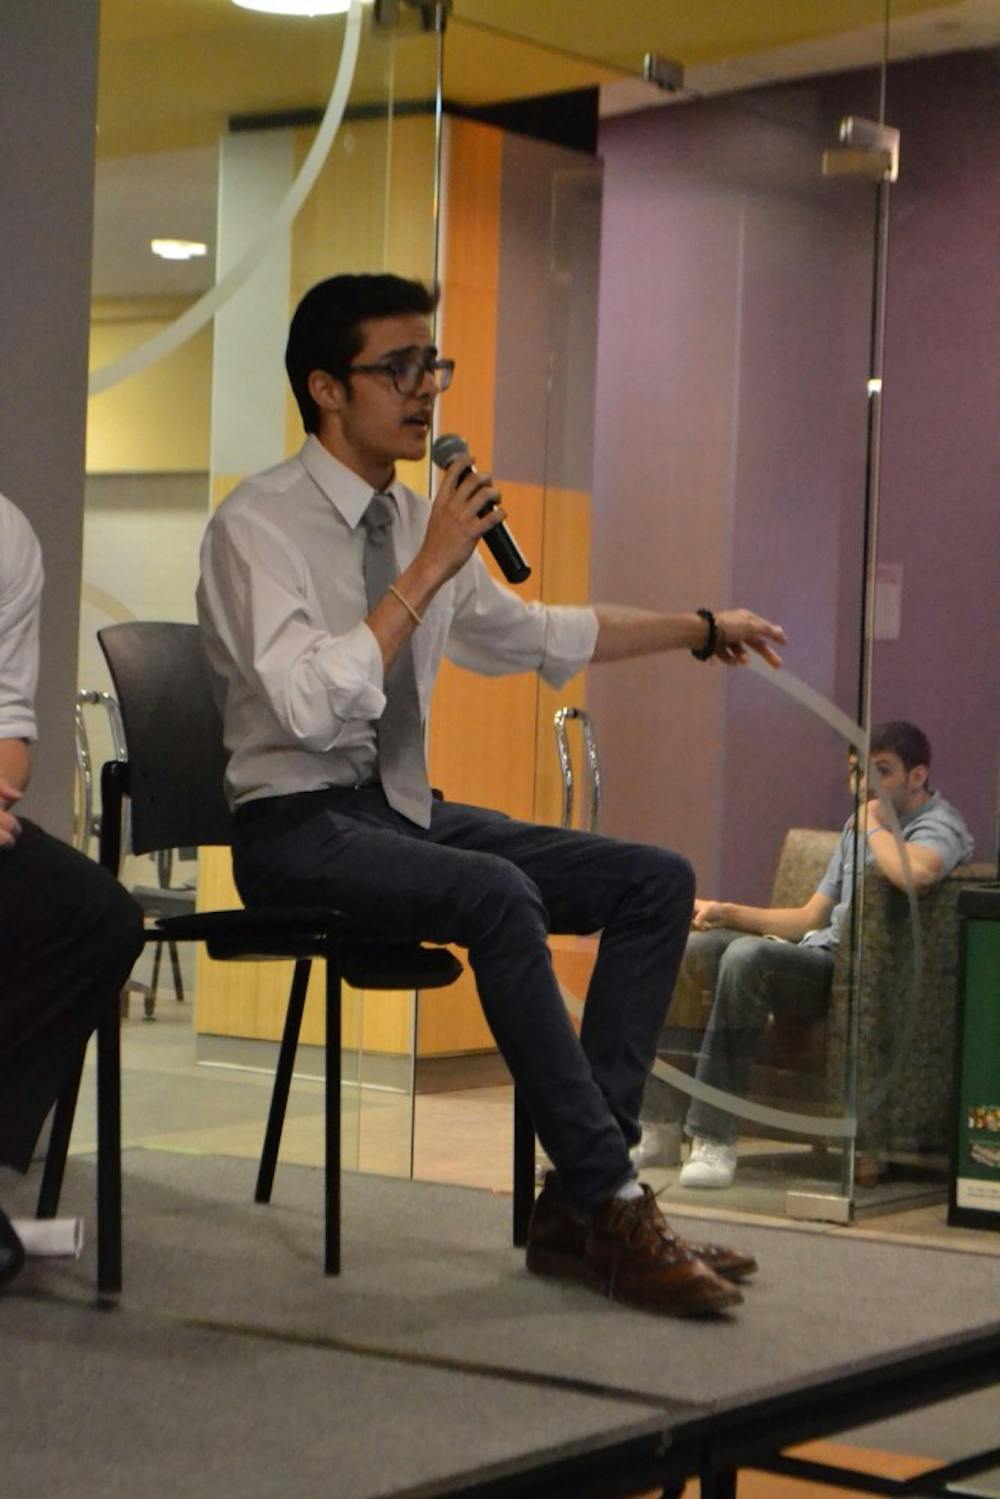 Will Mascaro, pictured at a student government presidential debate in 2016, was fired from his position as CASE director on Oct. 31. Supporters are calling for his reinstatement.&nbsp;